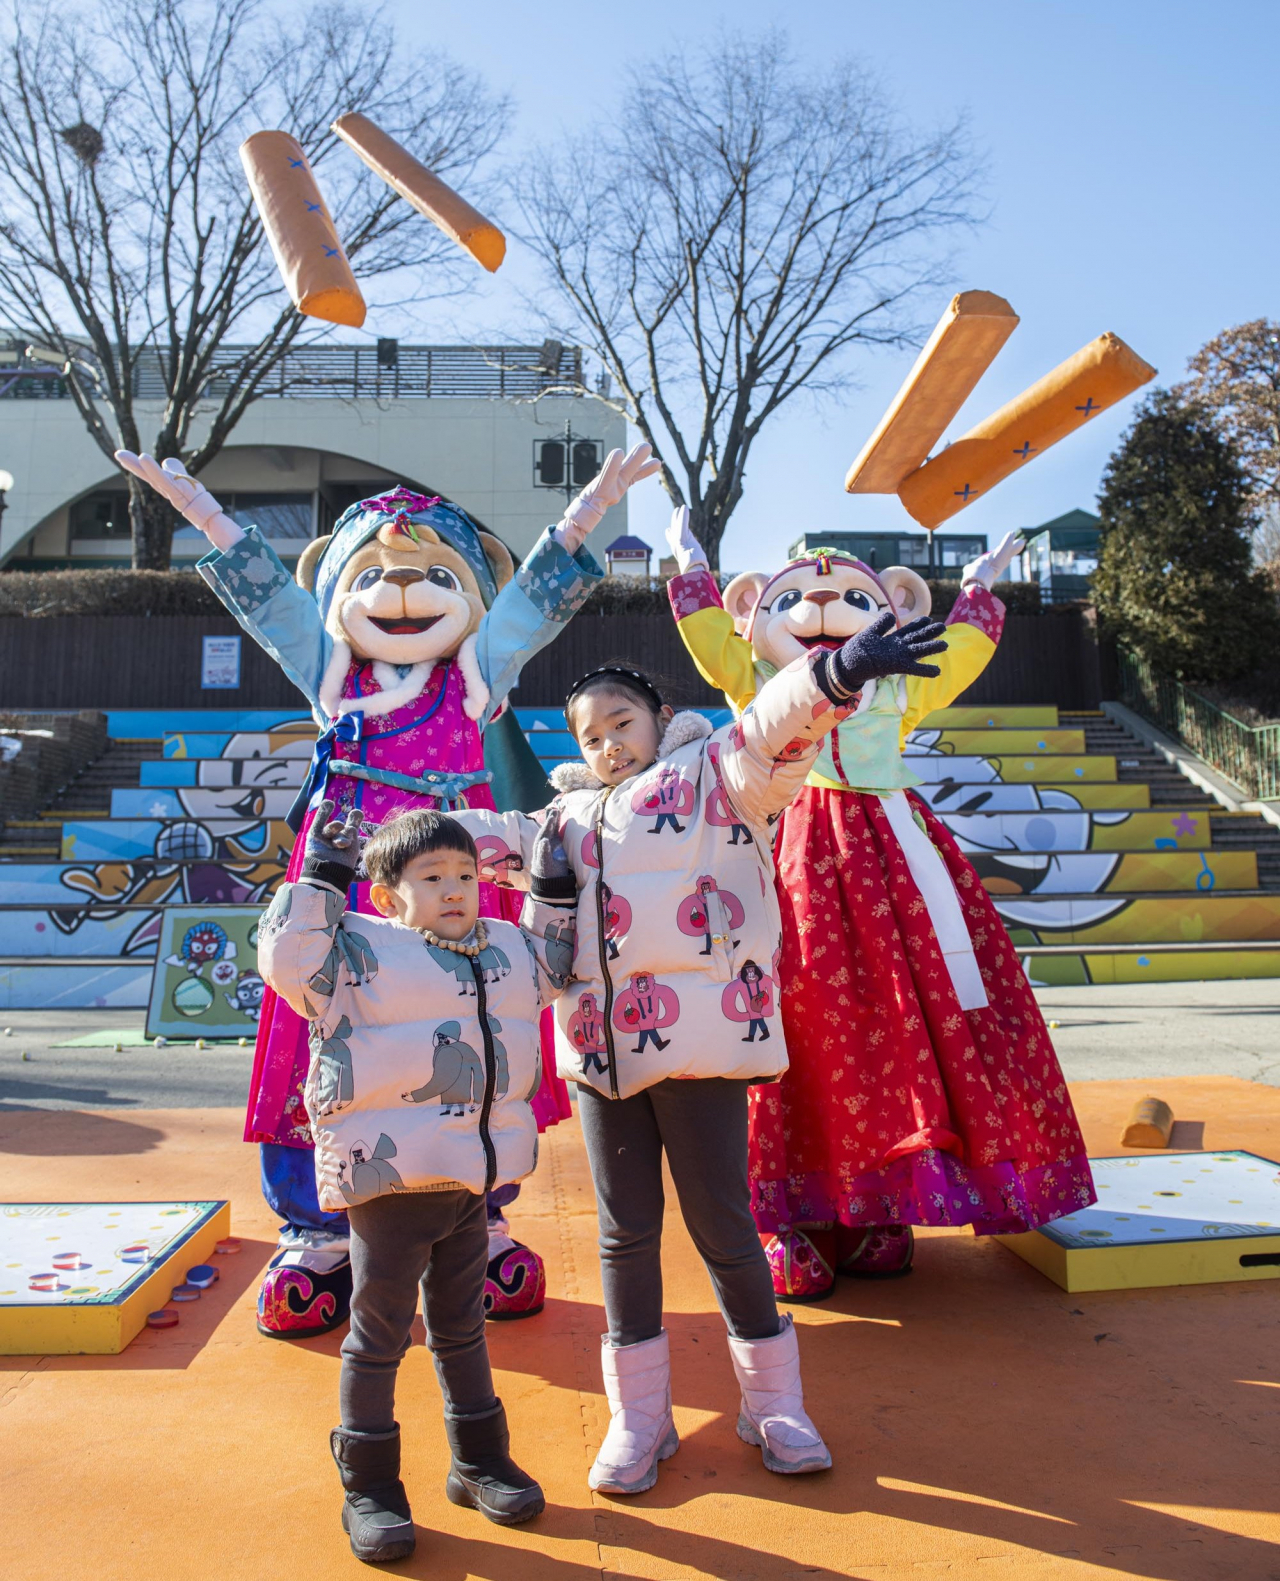 Everland mascots Lenny (left), Lara and young visitors pose for photos at Everland in Yongin, Gyeonggi Province. (Samsung C&T)